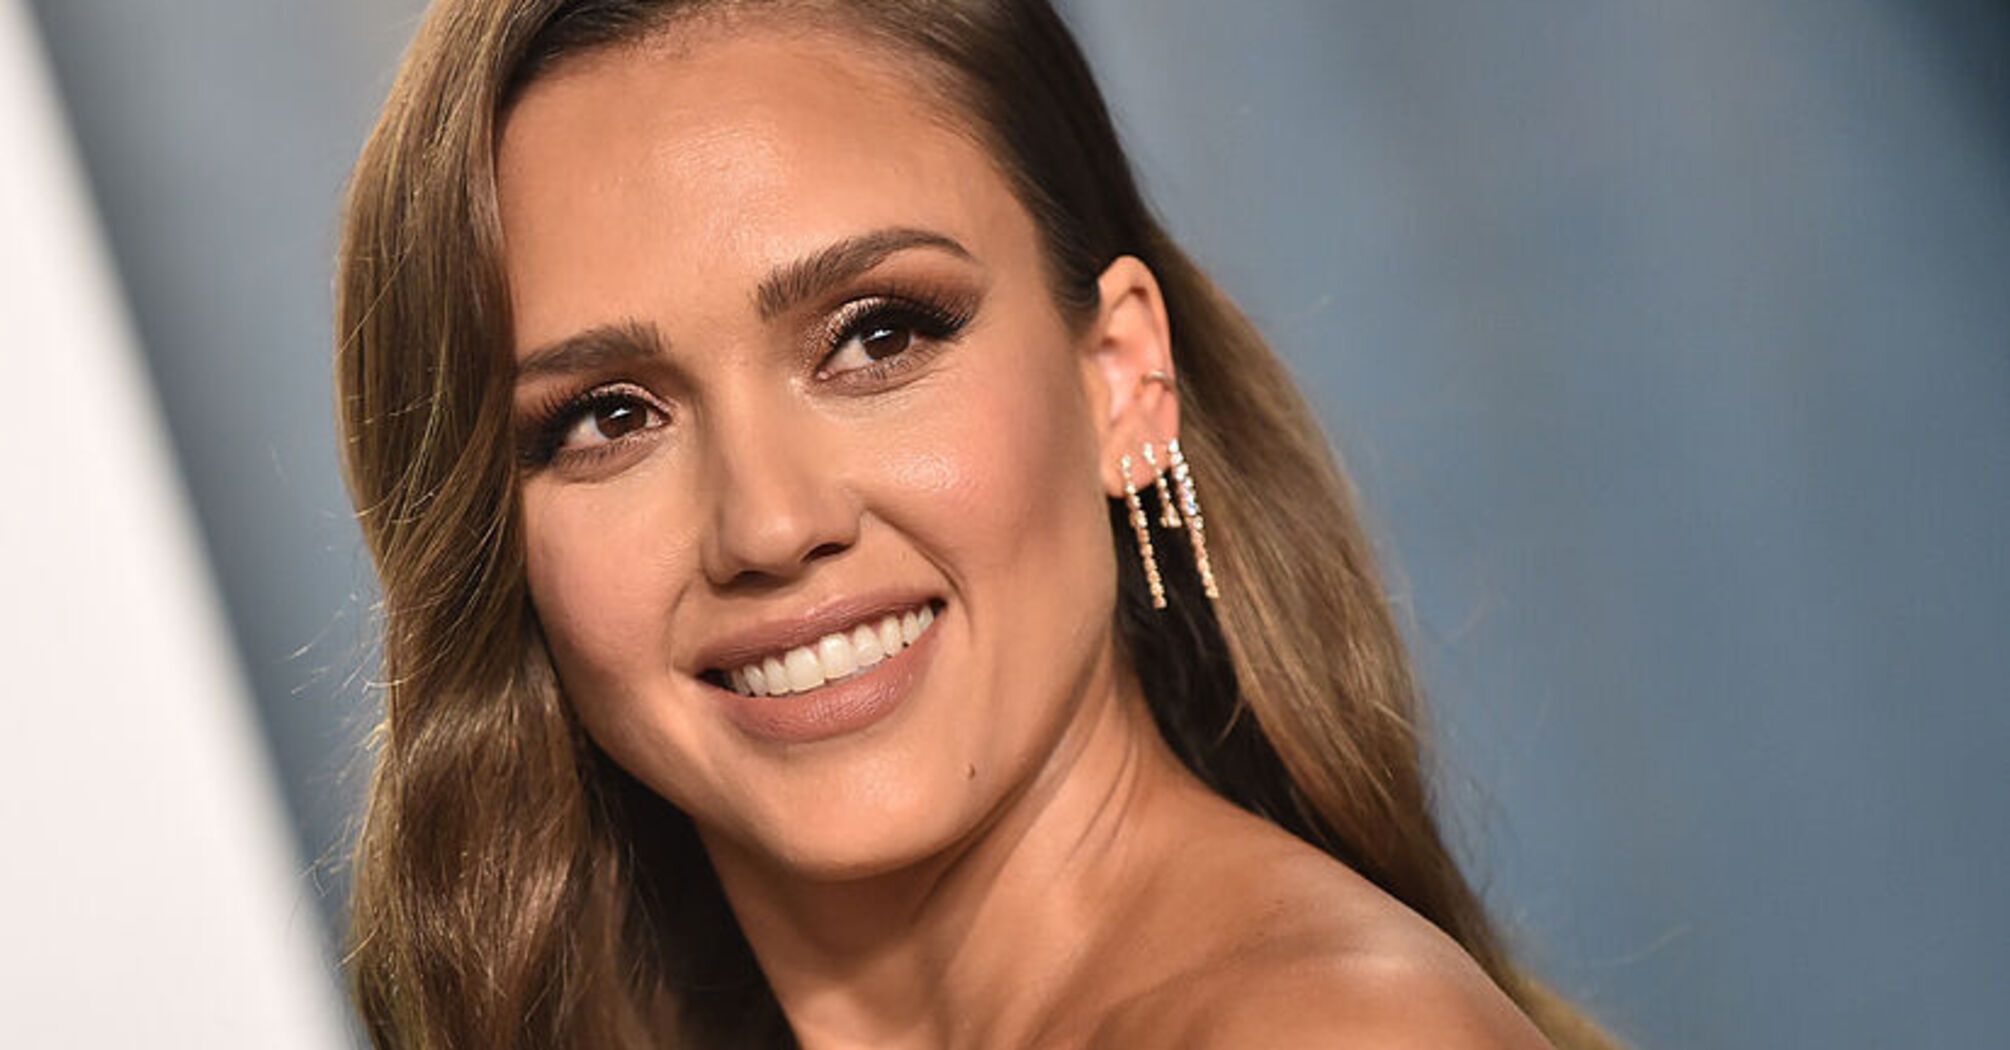 5 interesting facts about Jessica Alba